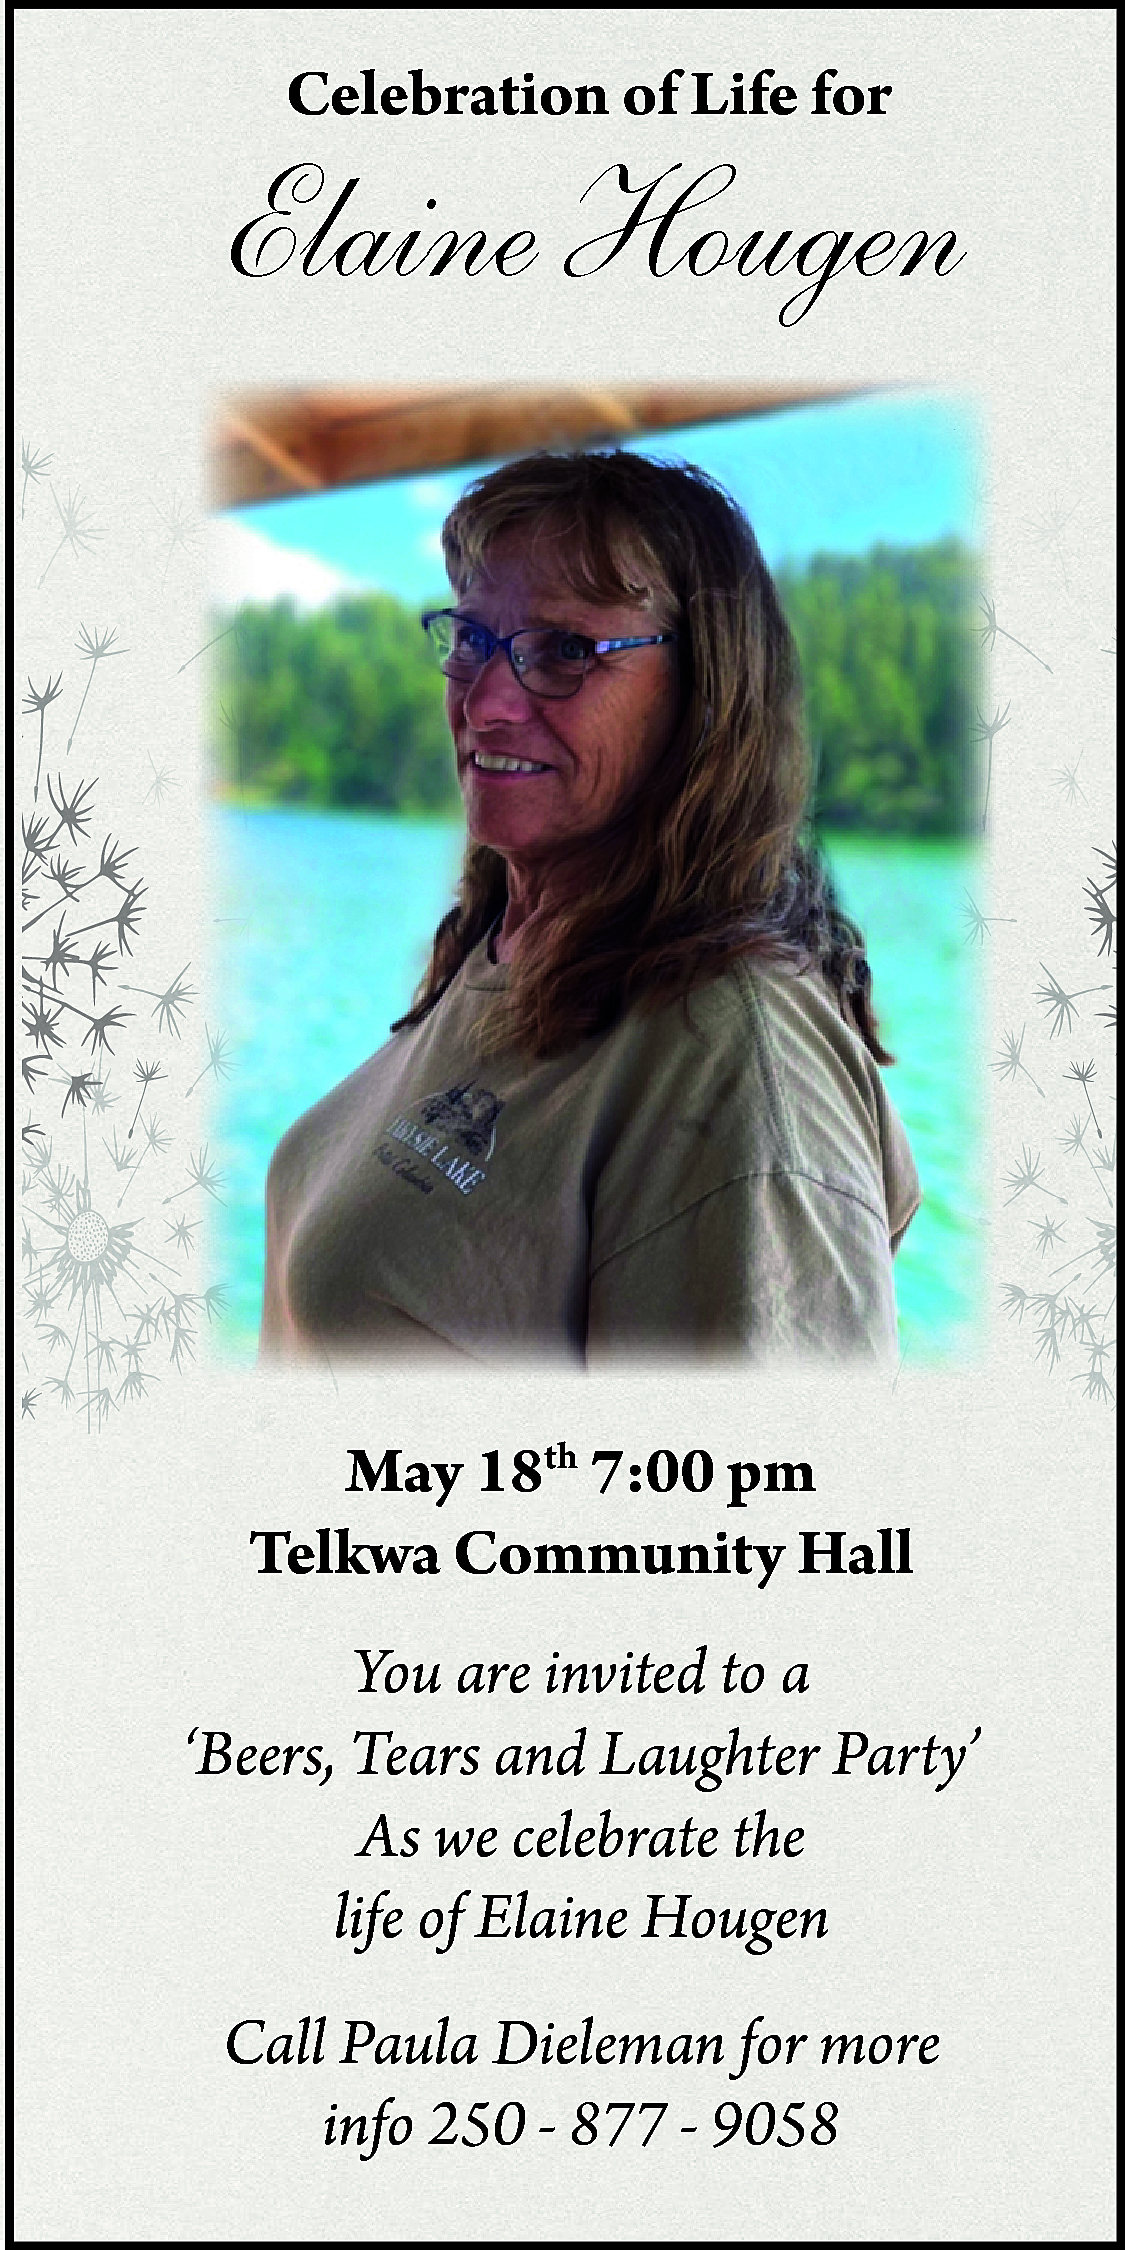 Celebration of Life for <br>  Celebration of Life for    Elaine Hougen    May 18th 7:00 pm  Telkwa Community Hall  You are invited to a  ‘Beers, Tears and Laughter Party’  As we celebrate the  life of Elaine Hougen  Call Paula Dieleman for more  info 250 - 877 - 9058    